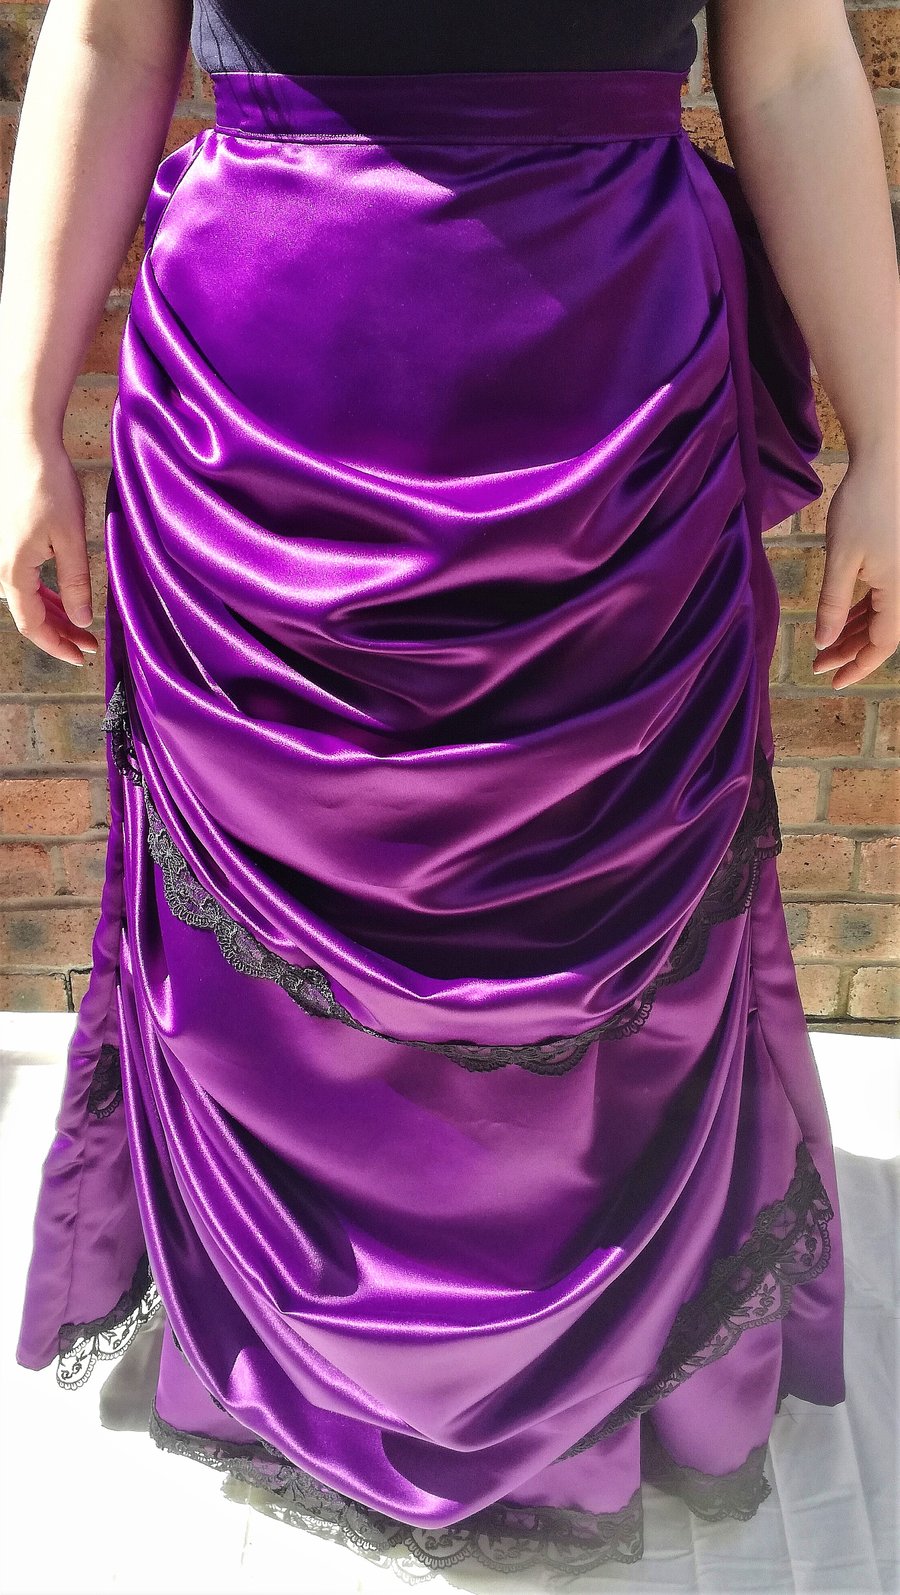 Hand made Victorian bustle skirt in purple duchess satin with bustle cage